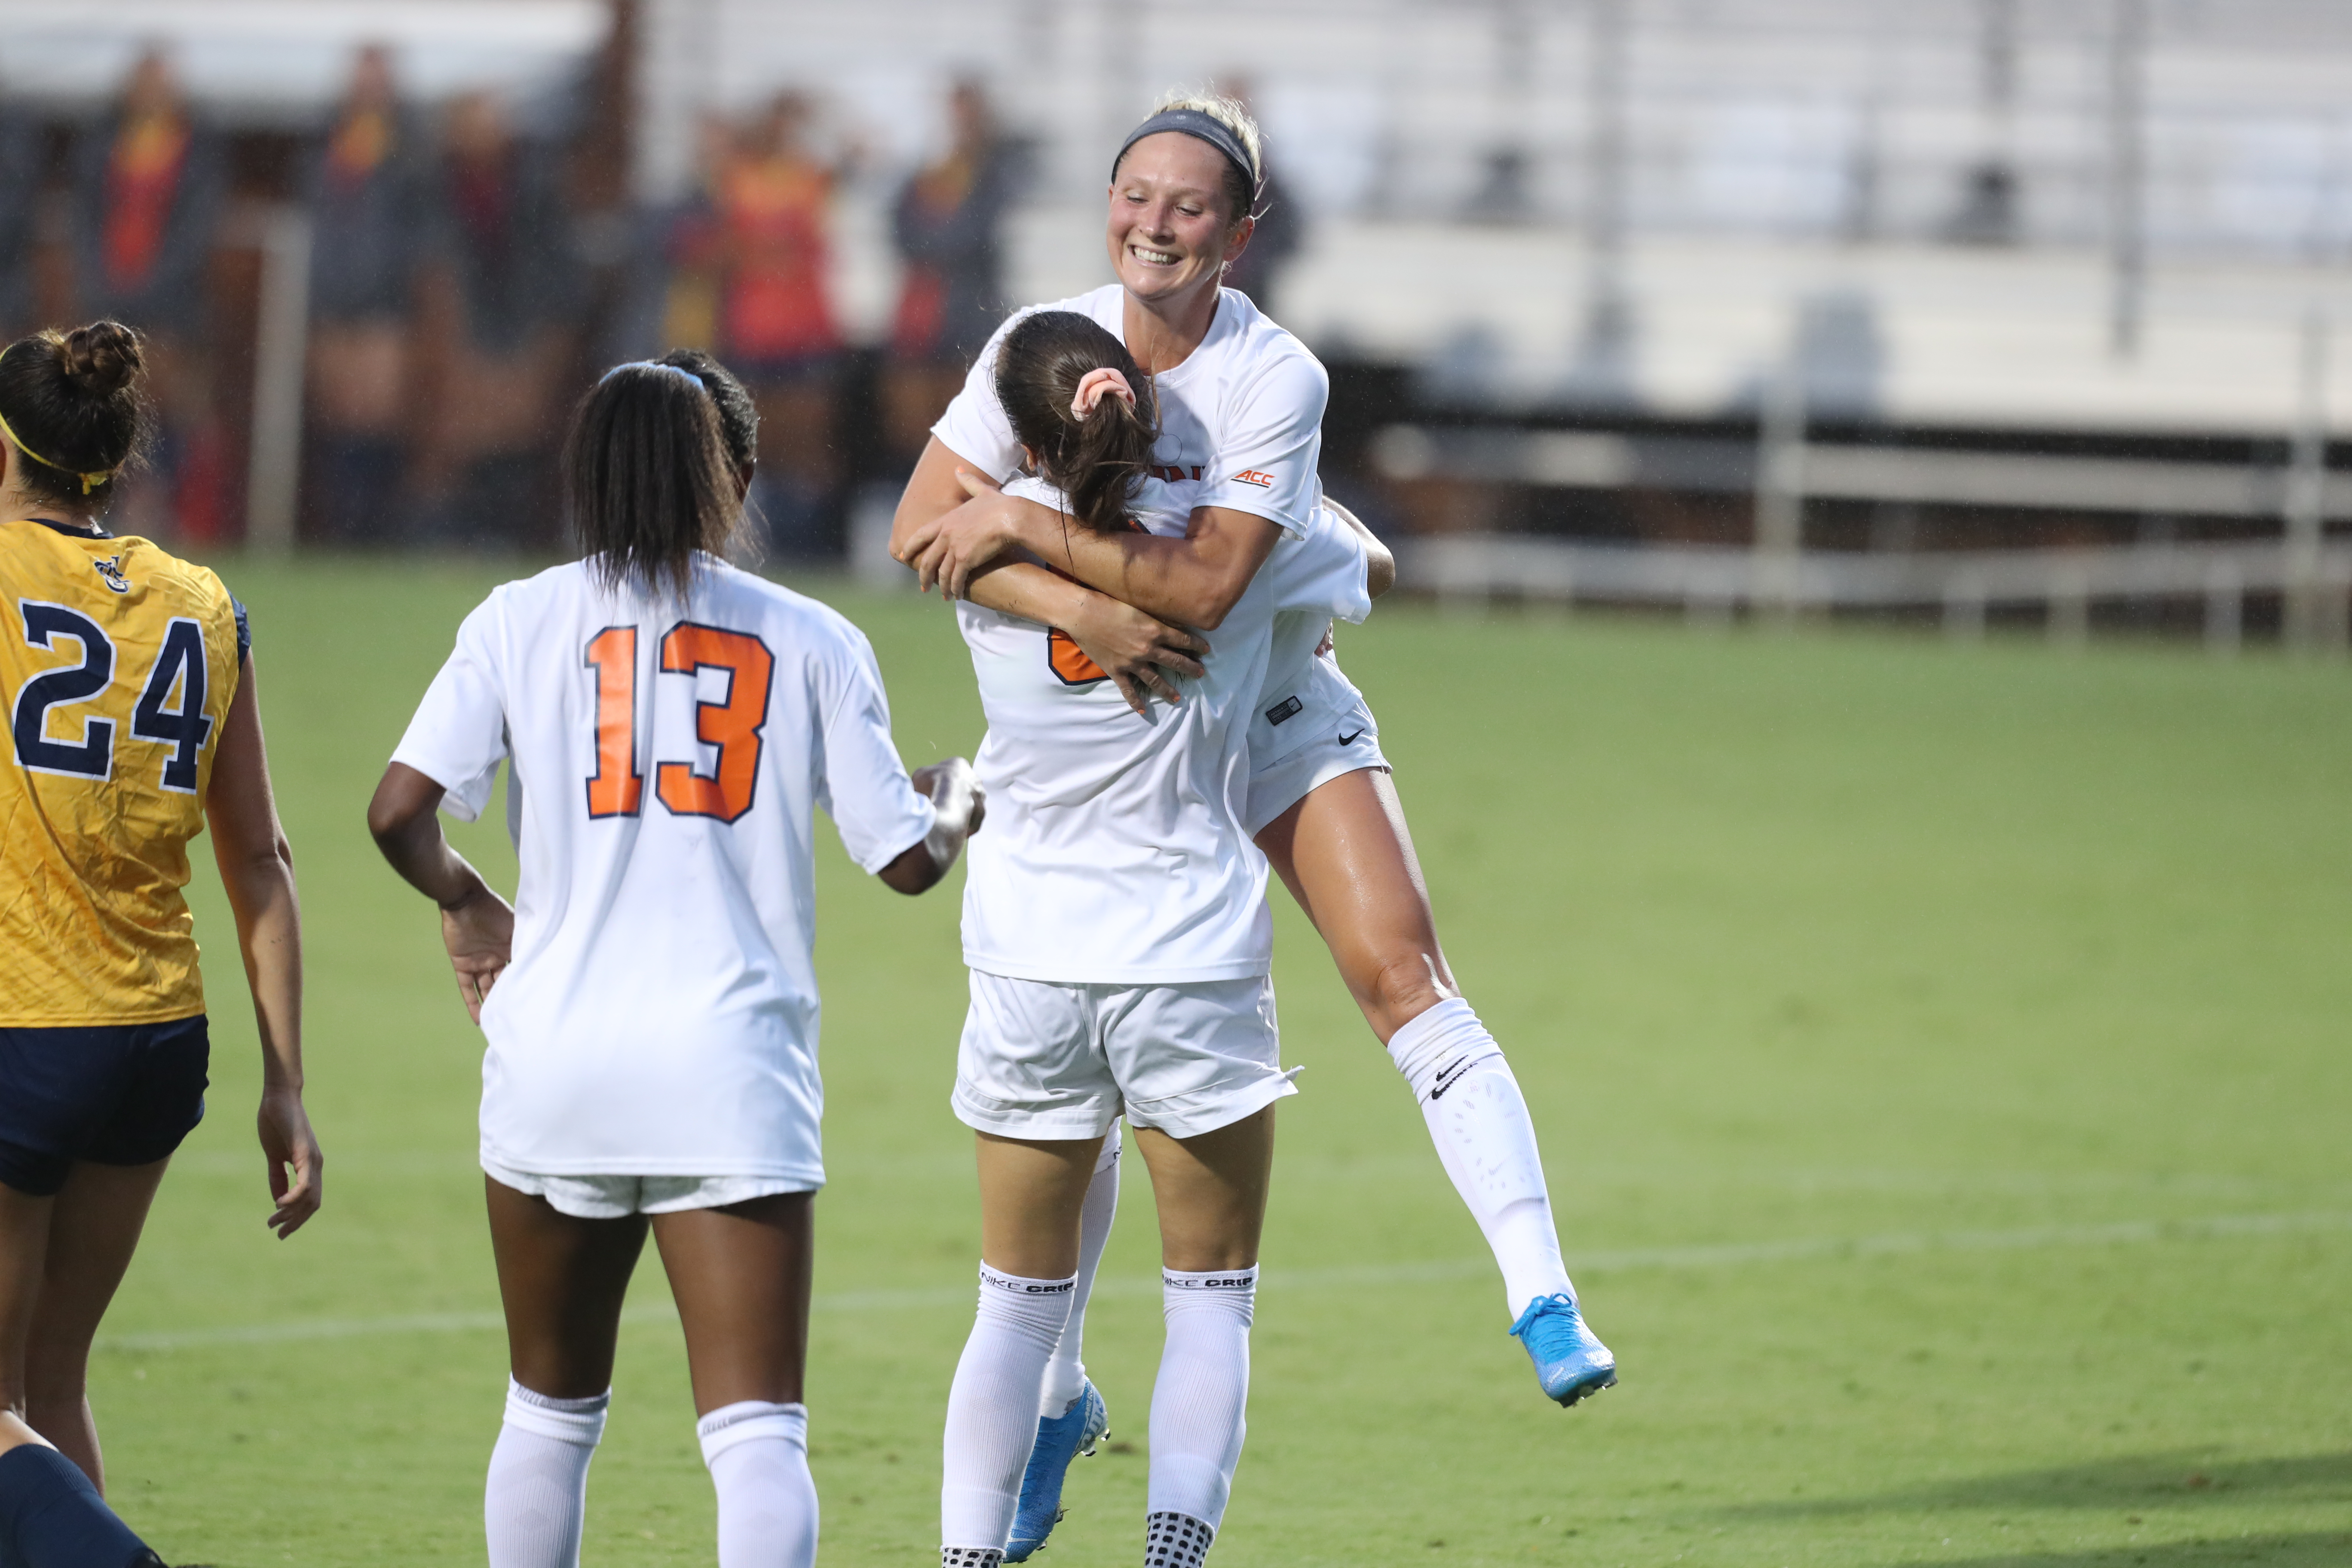 UVA's womens soccer teammate jumps into the arms of another teammate during the game